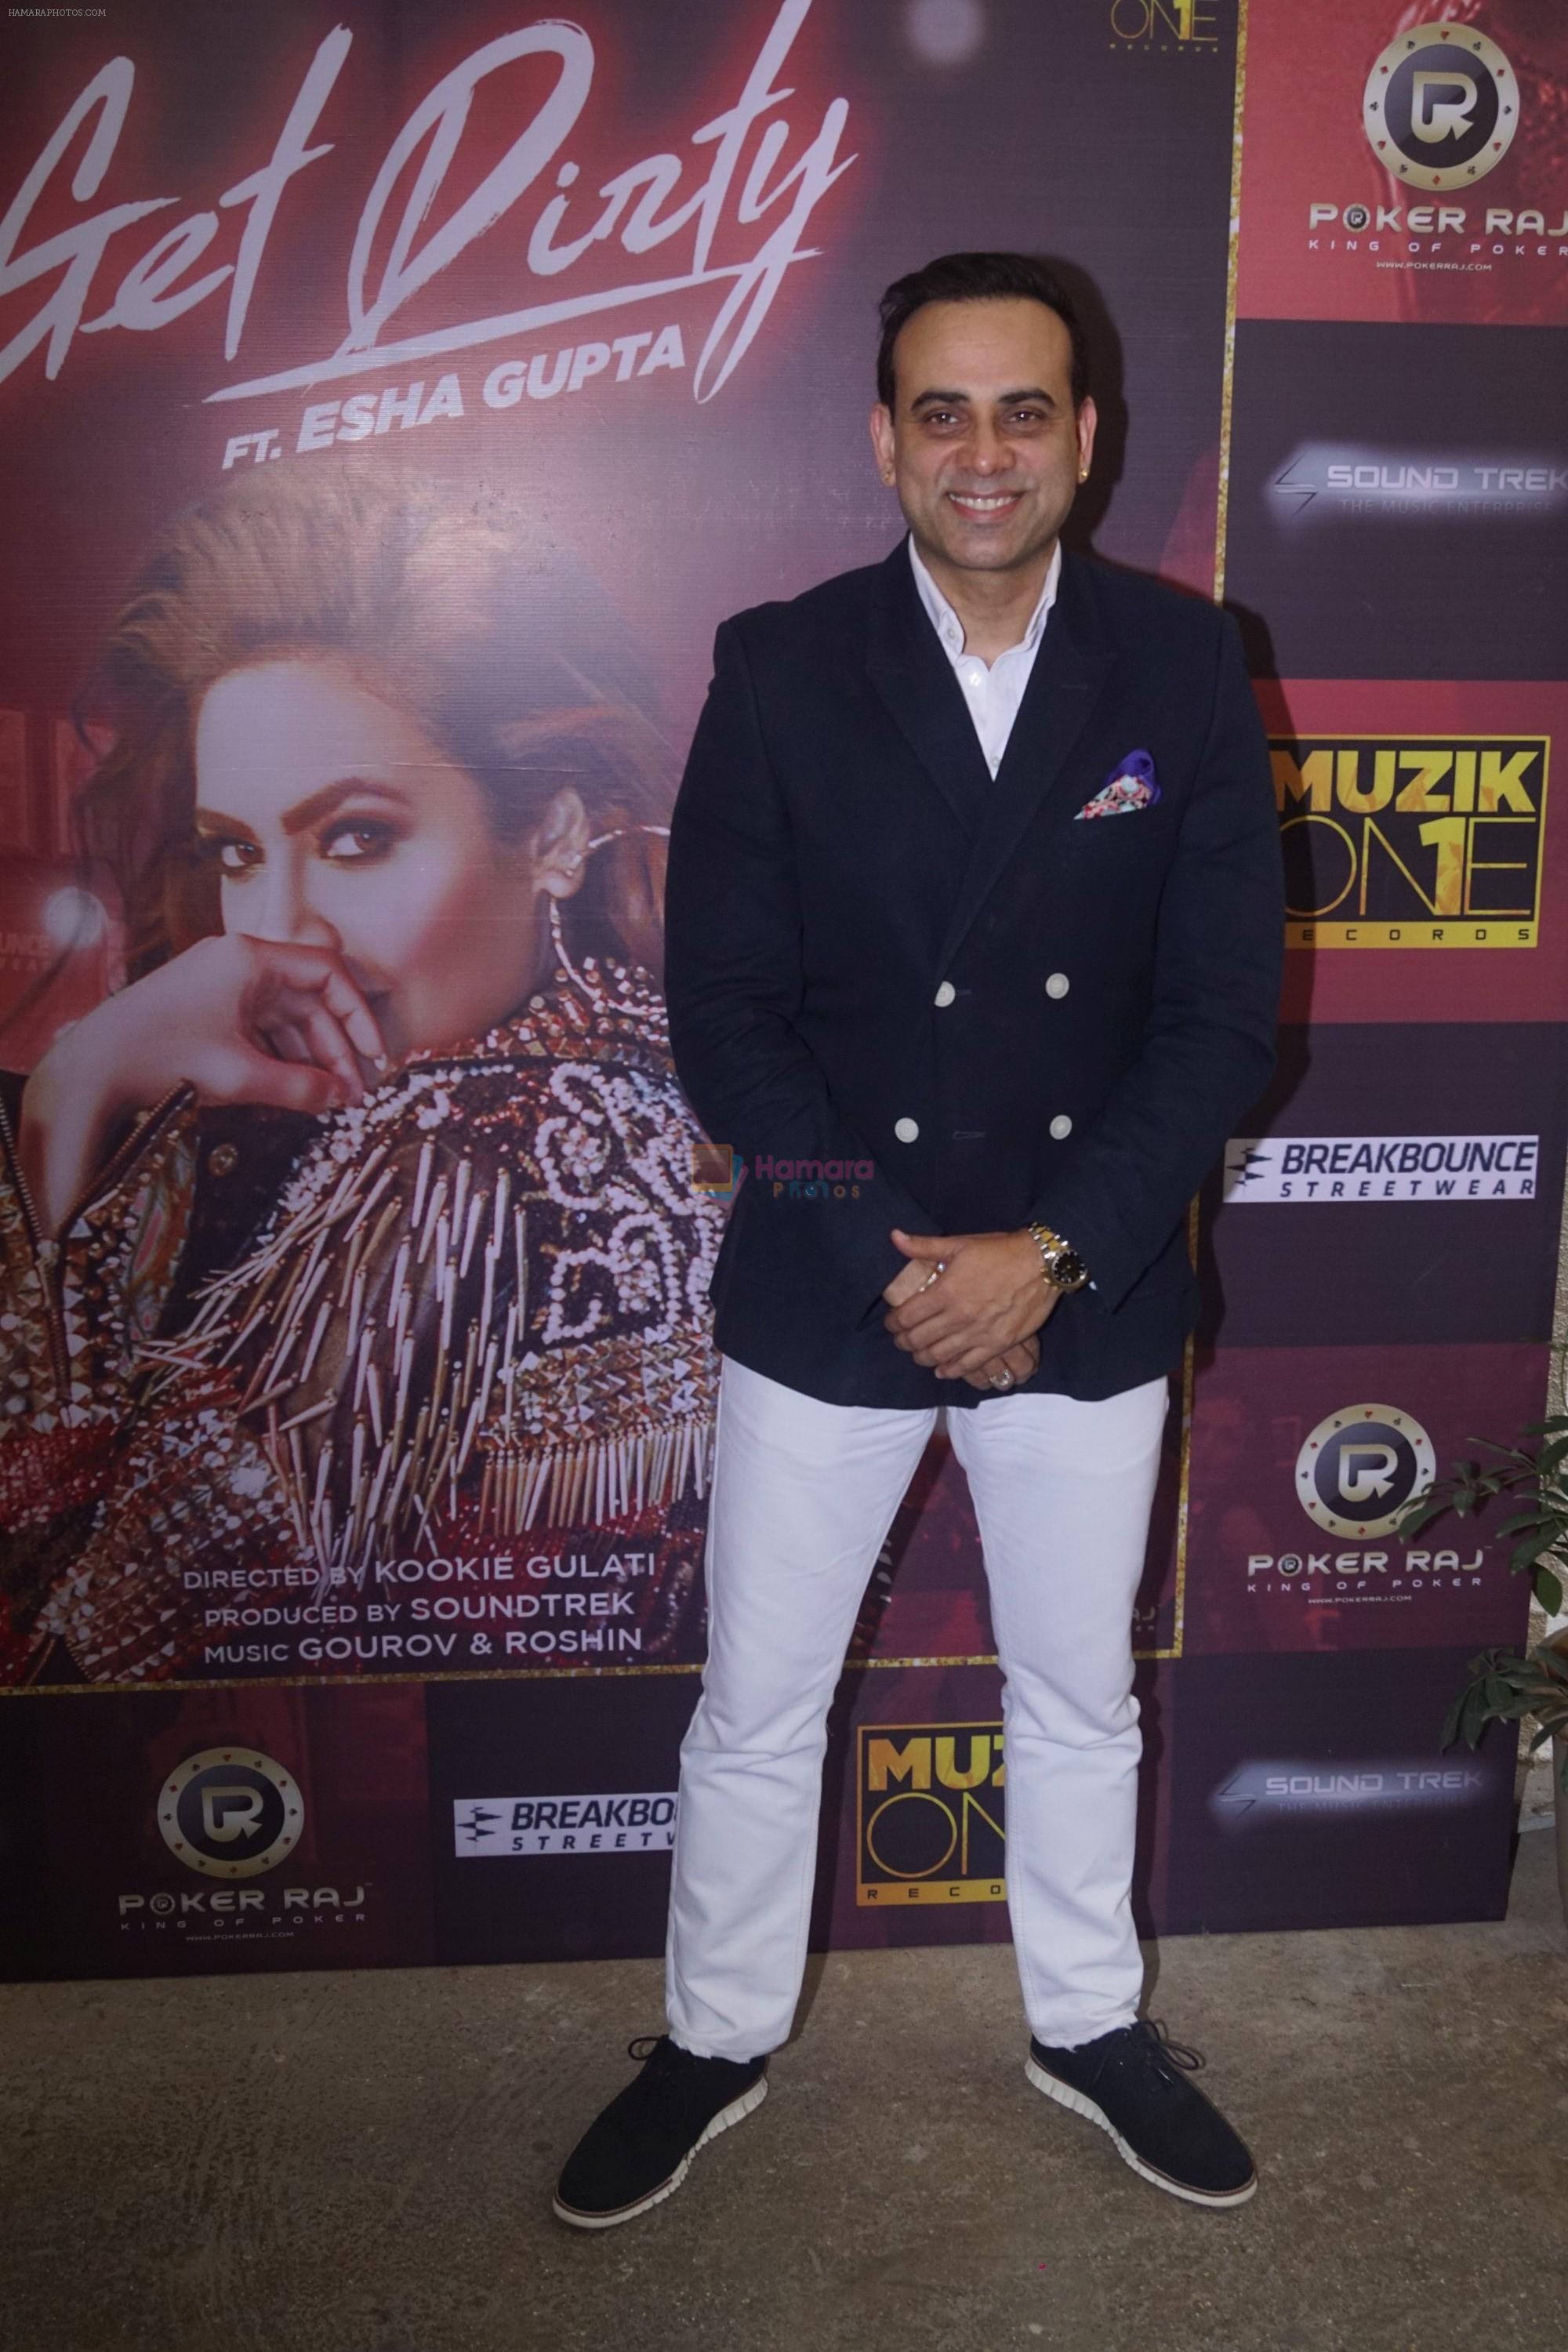 at the Music Launch of Muzik One Record 1st Single Get Dirty on 11th Jan 2019